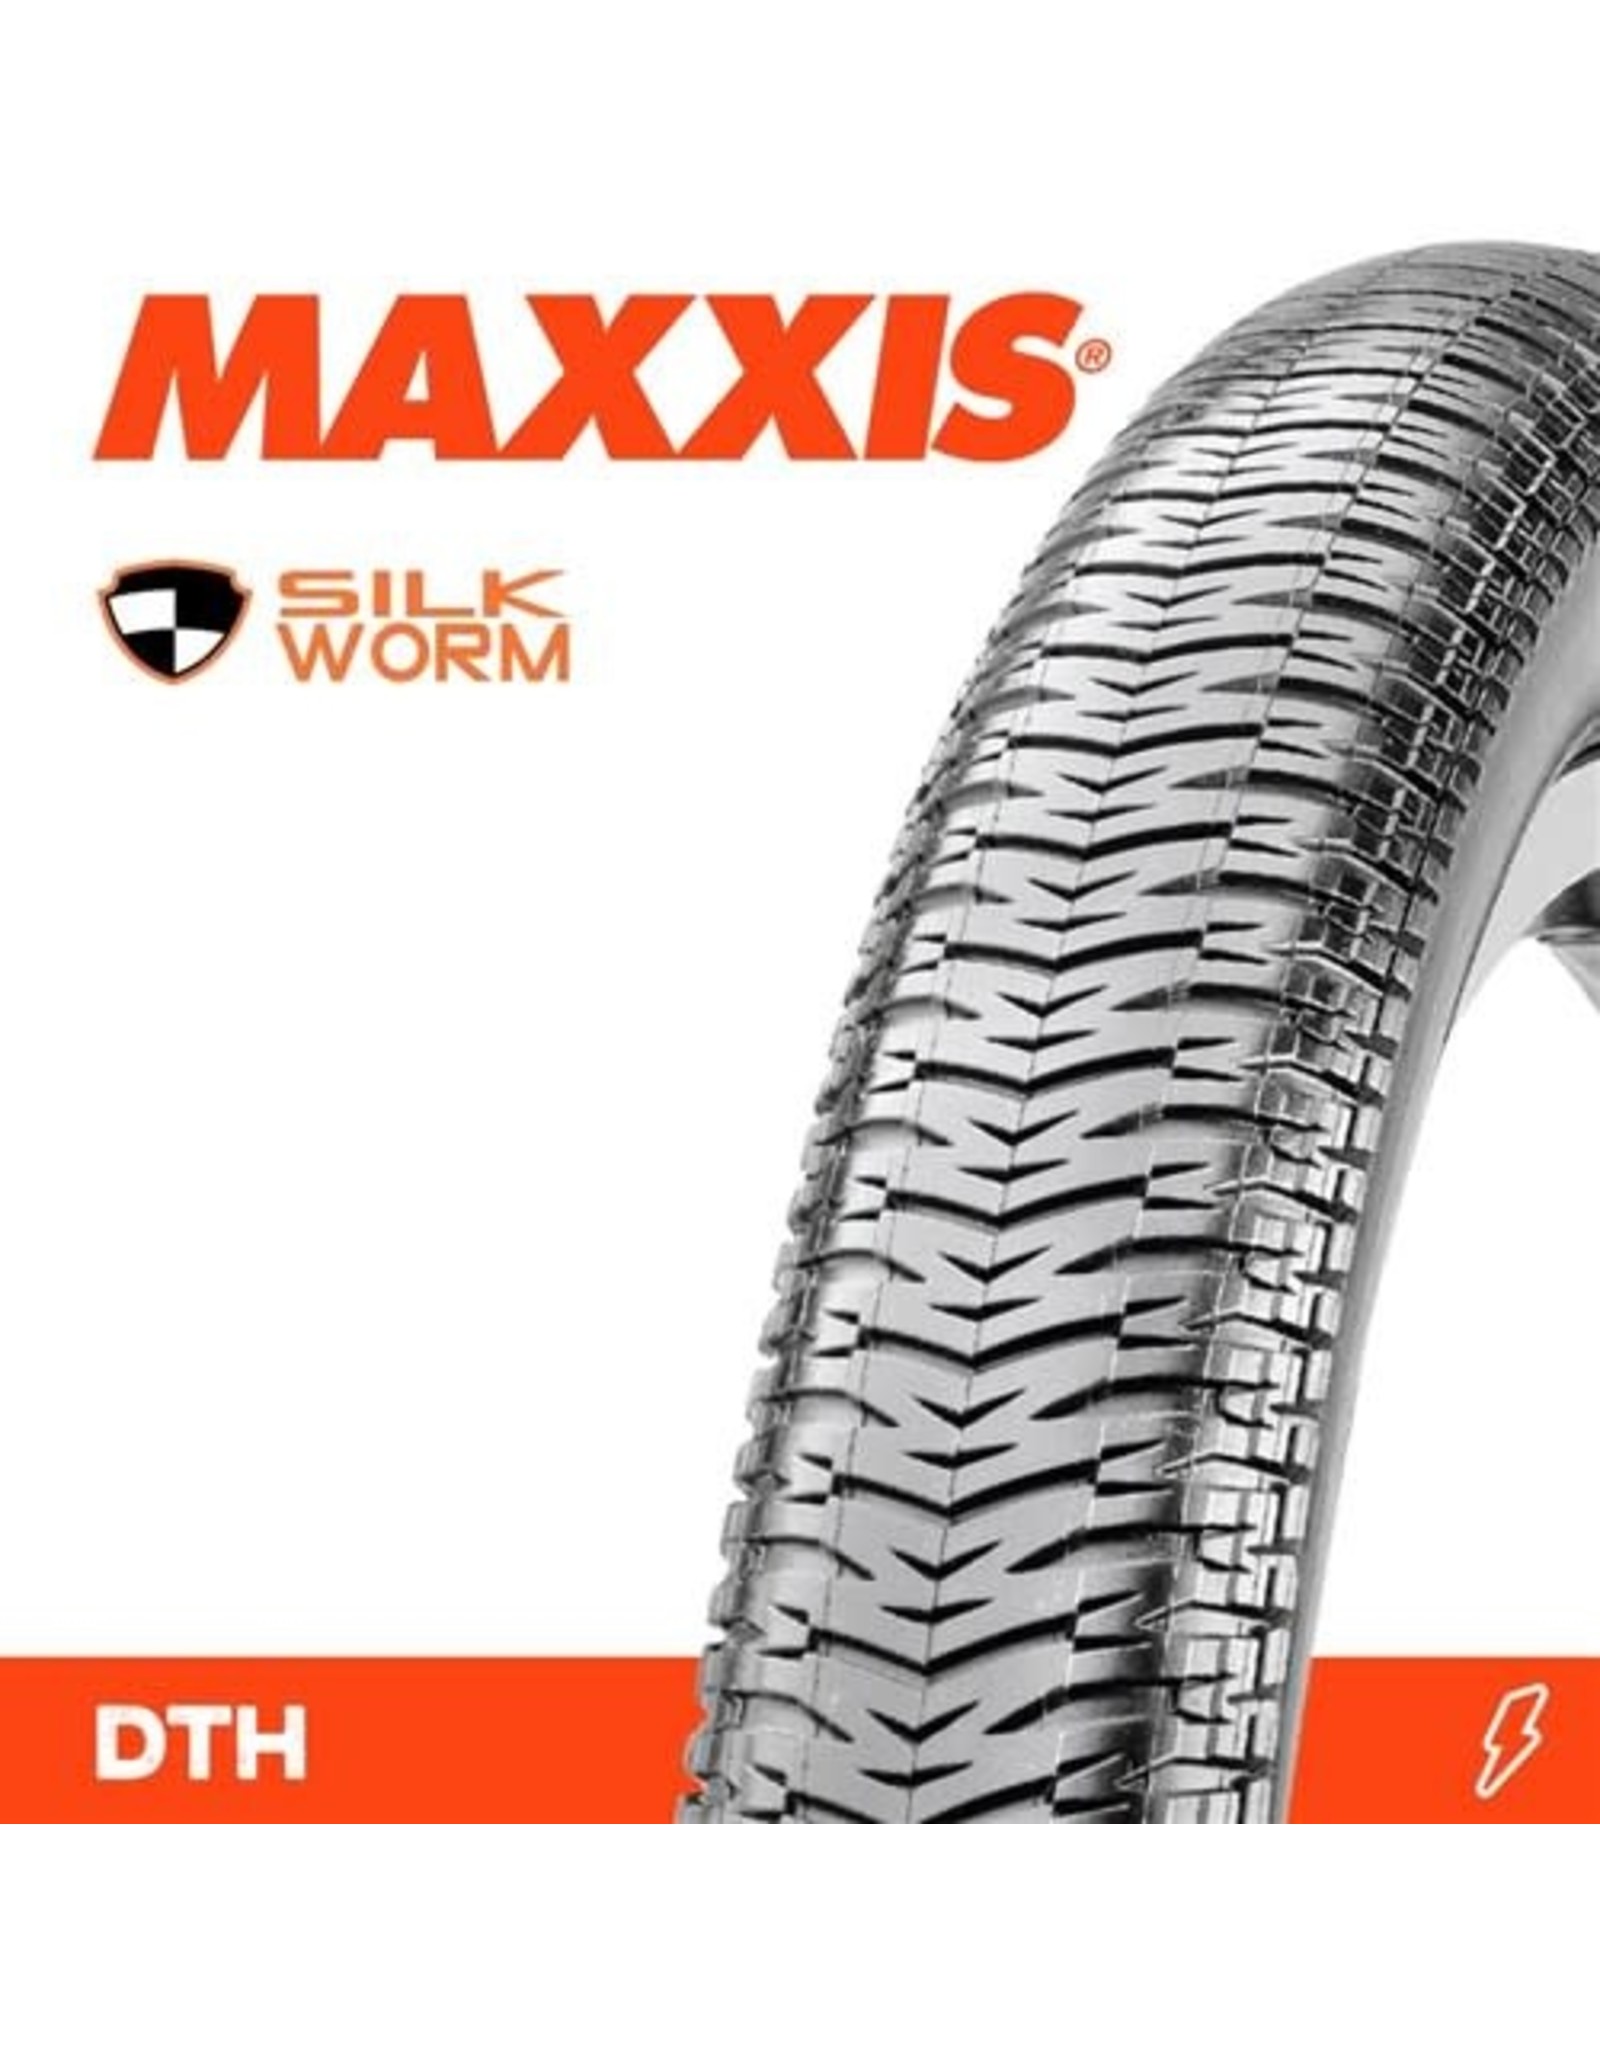 MAXXIS MAXXIS DTH 20 X 1-1/8” SILKWORM WIRE TYRE